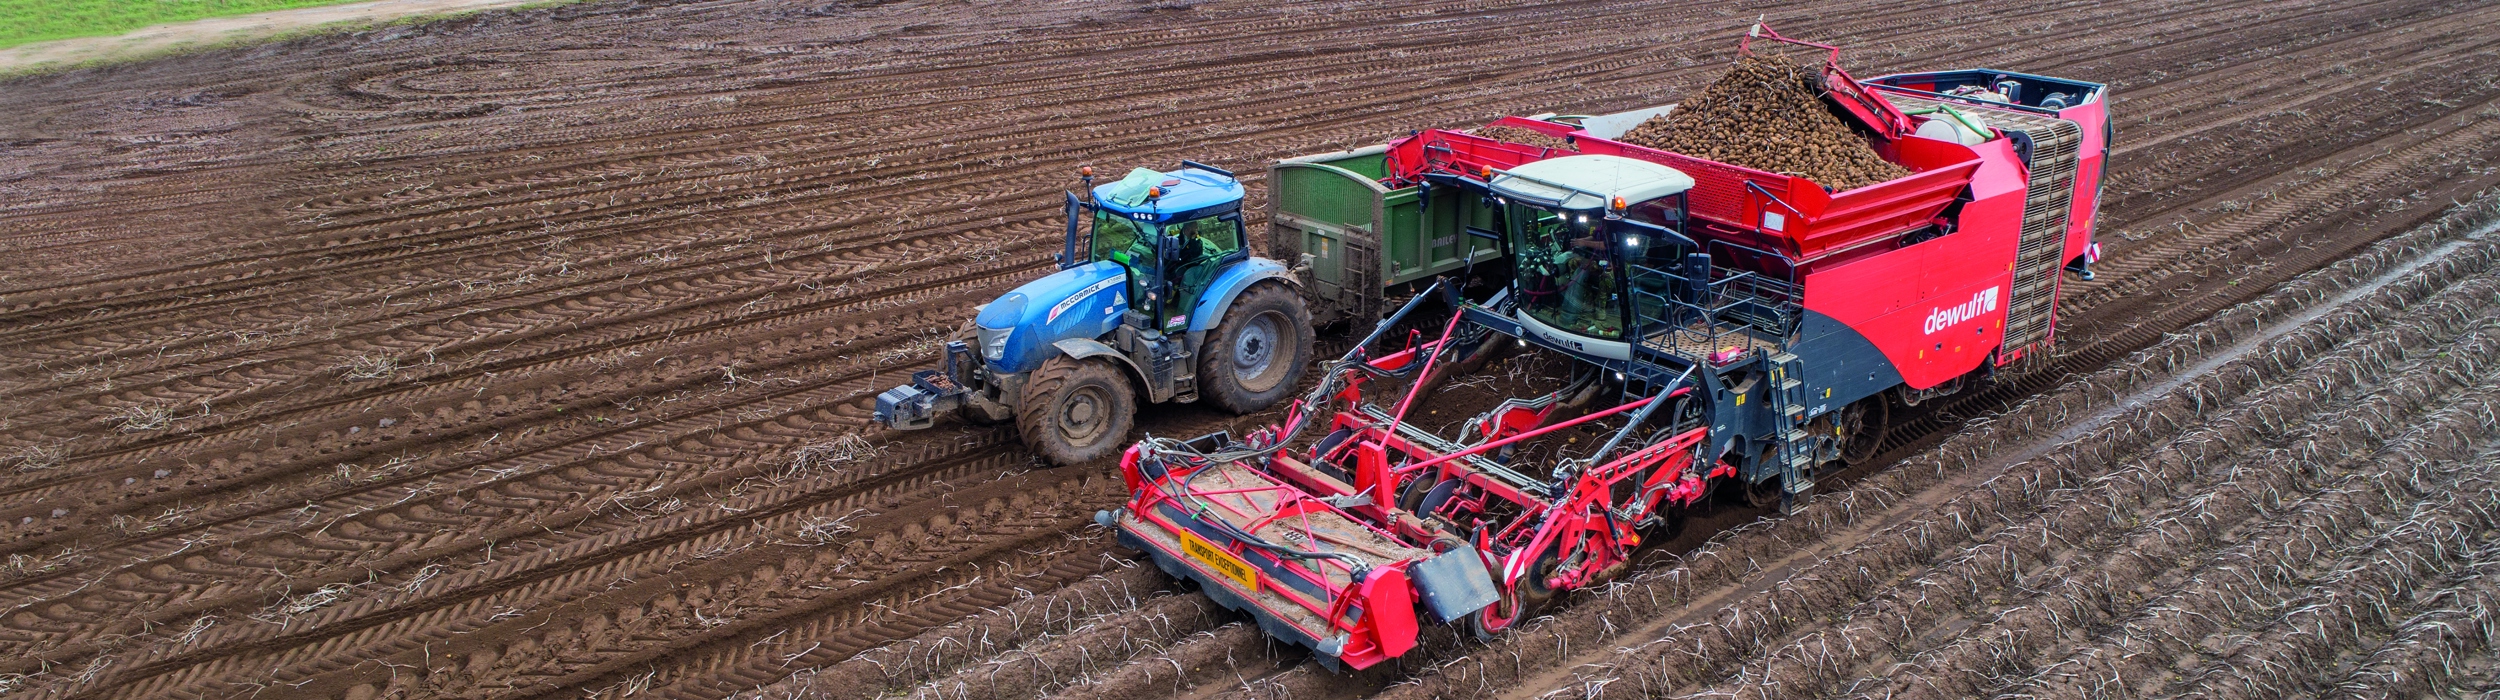 Self-propelled, 4-row sieving harvester for 4 x 90 cm